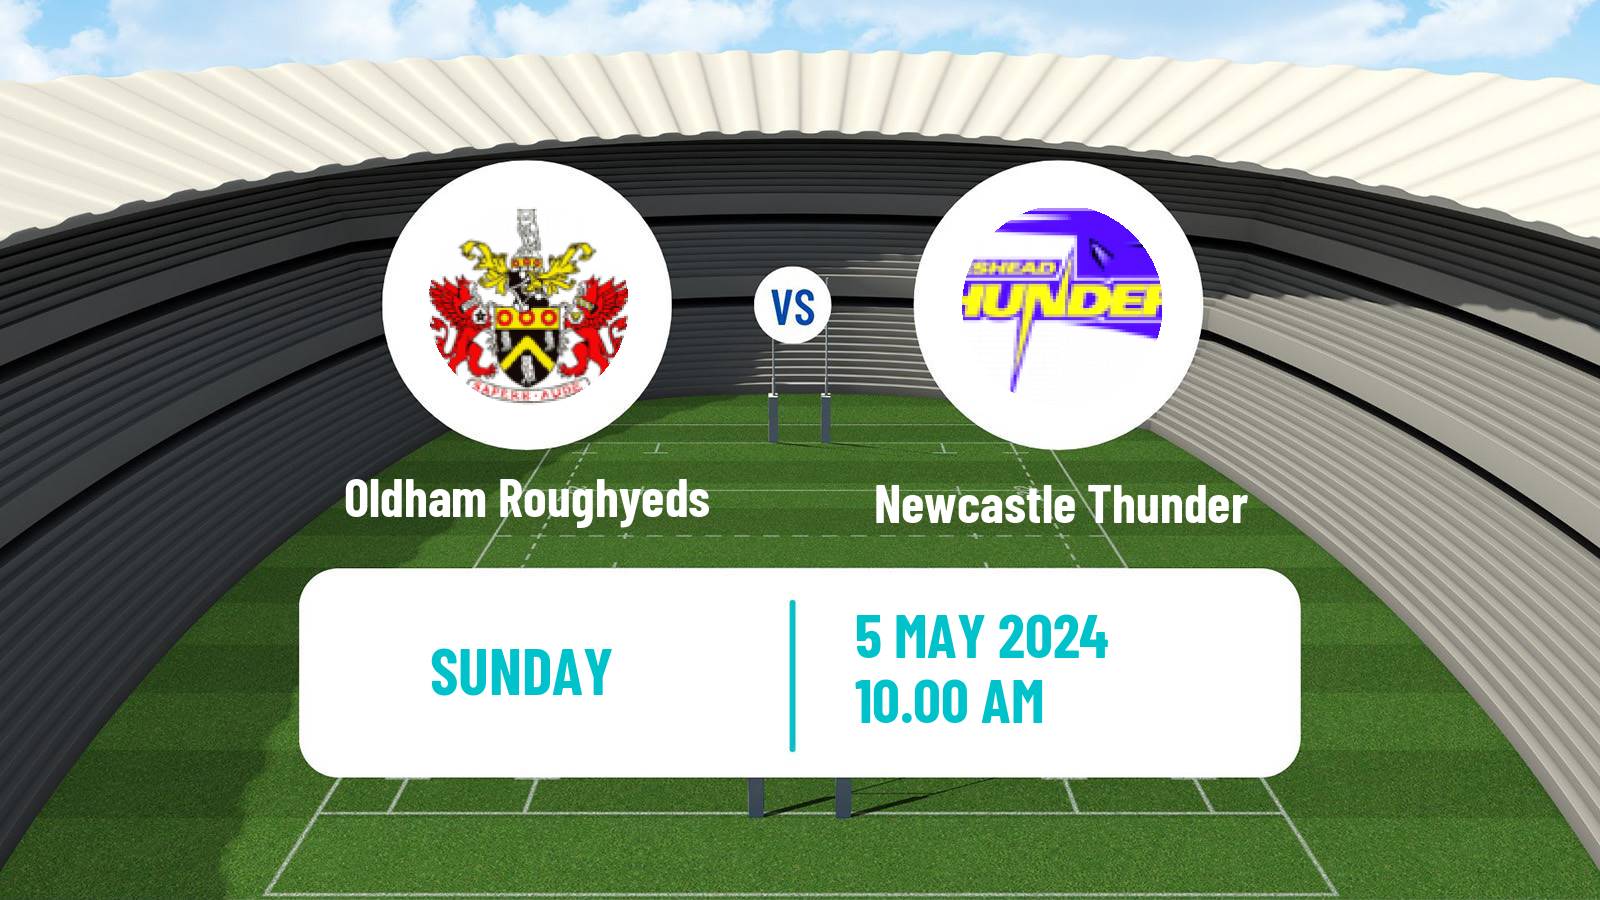 Rugby league English League 1 Rugby League Oldham Roughyeds - Newcastle Thunder